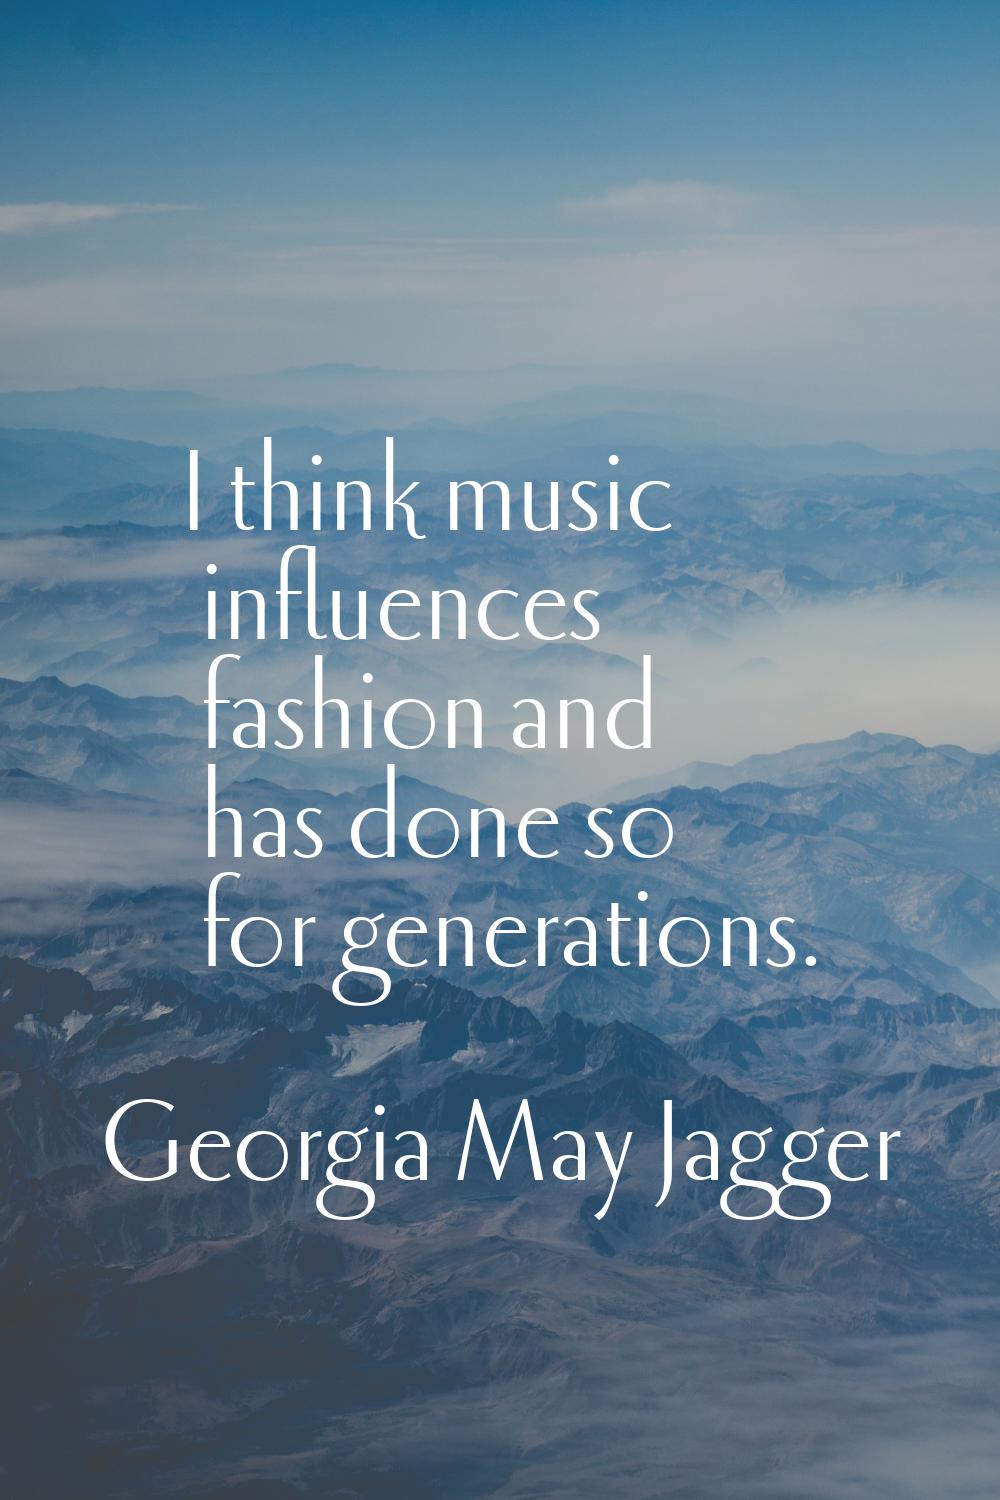 I think music influences fashion and has done so for generations.